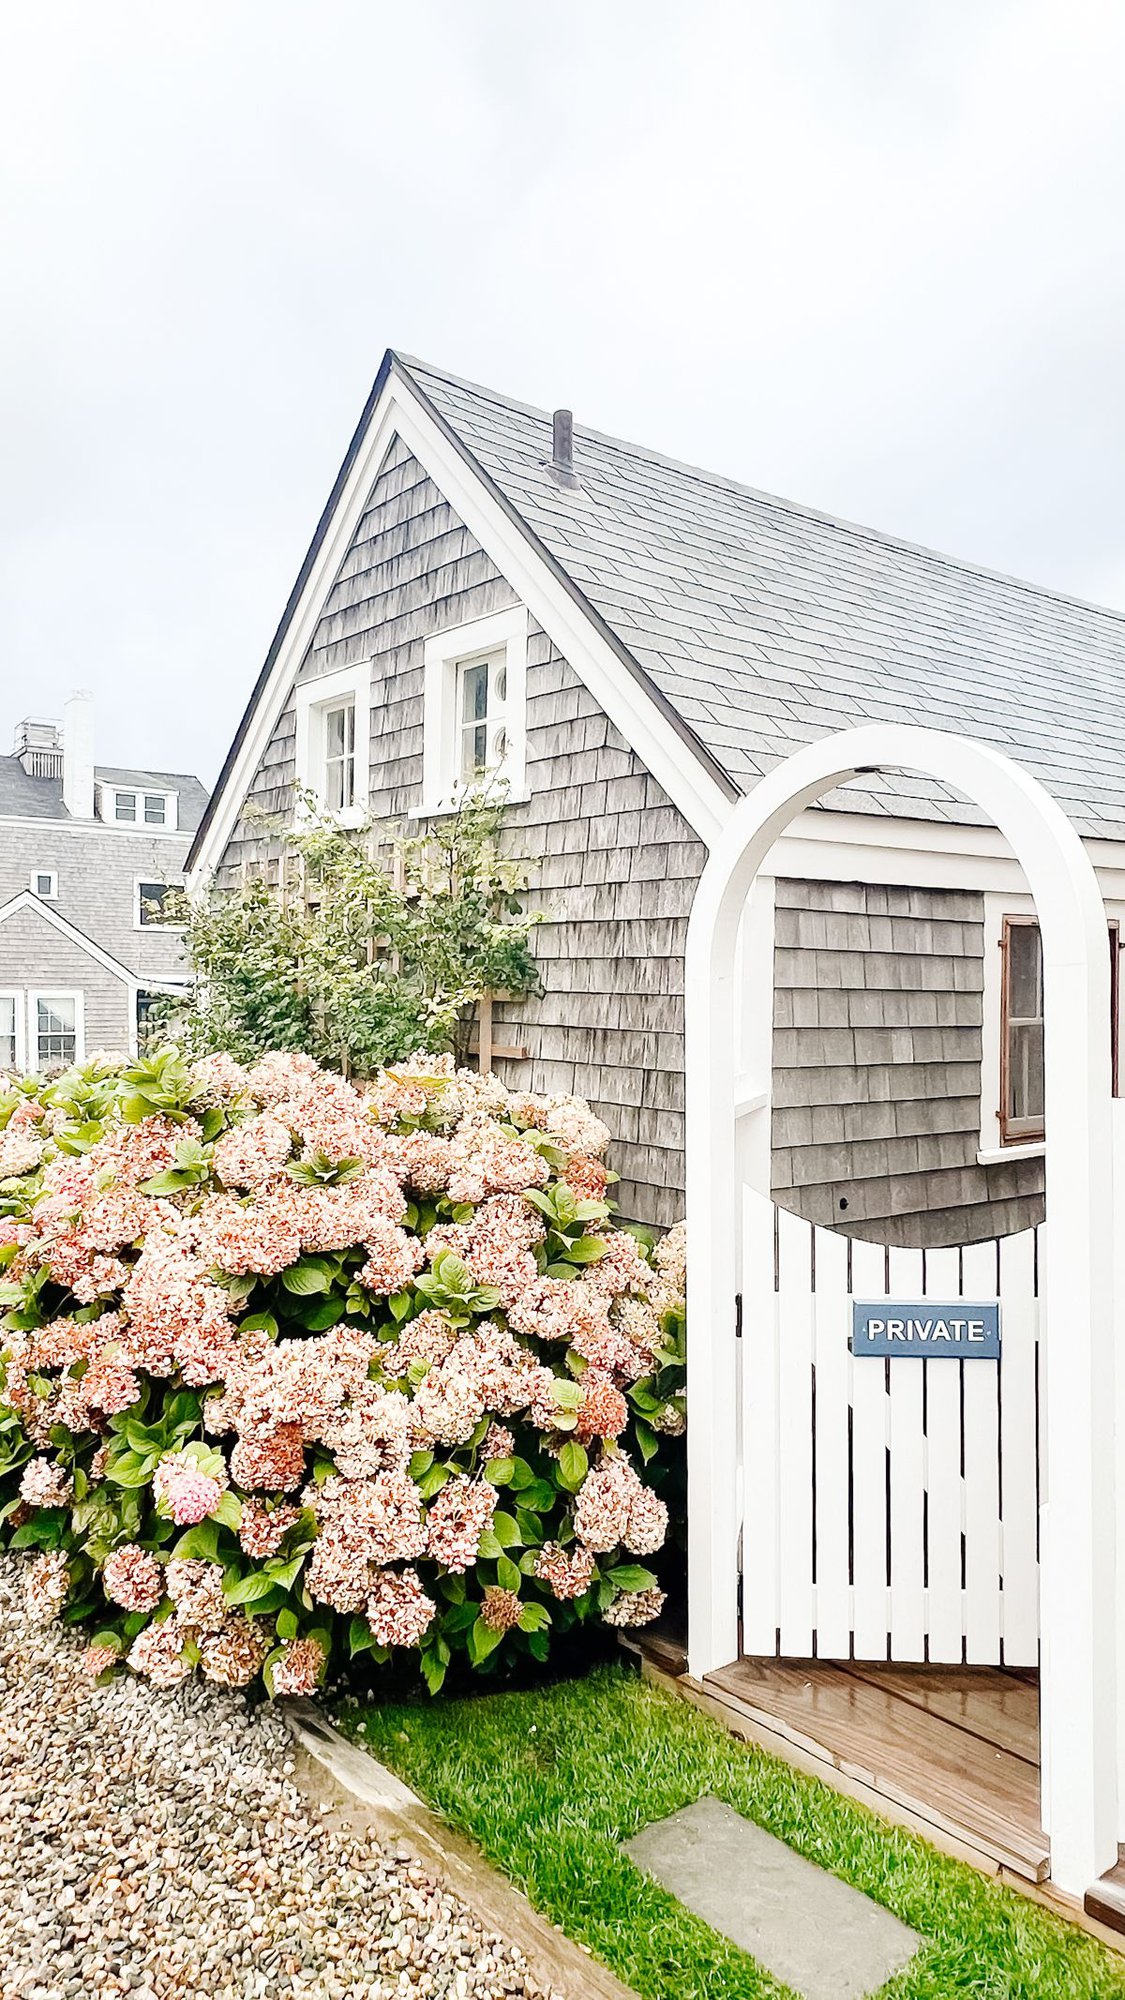 A shingled cottage with a white picket fence and hydrangeas in front, on Nantucket